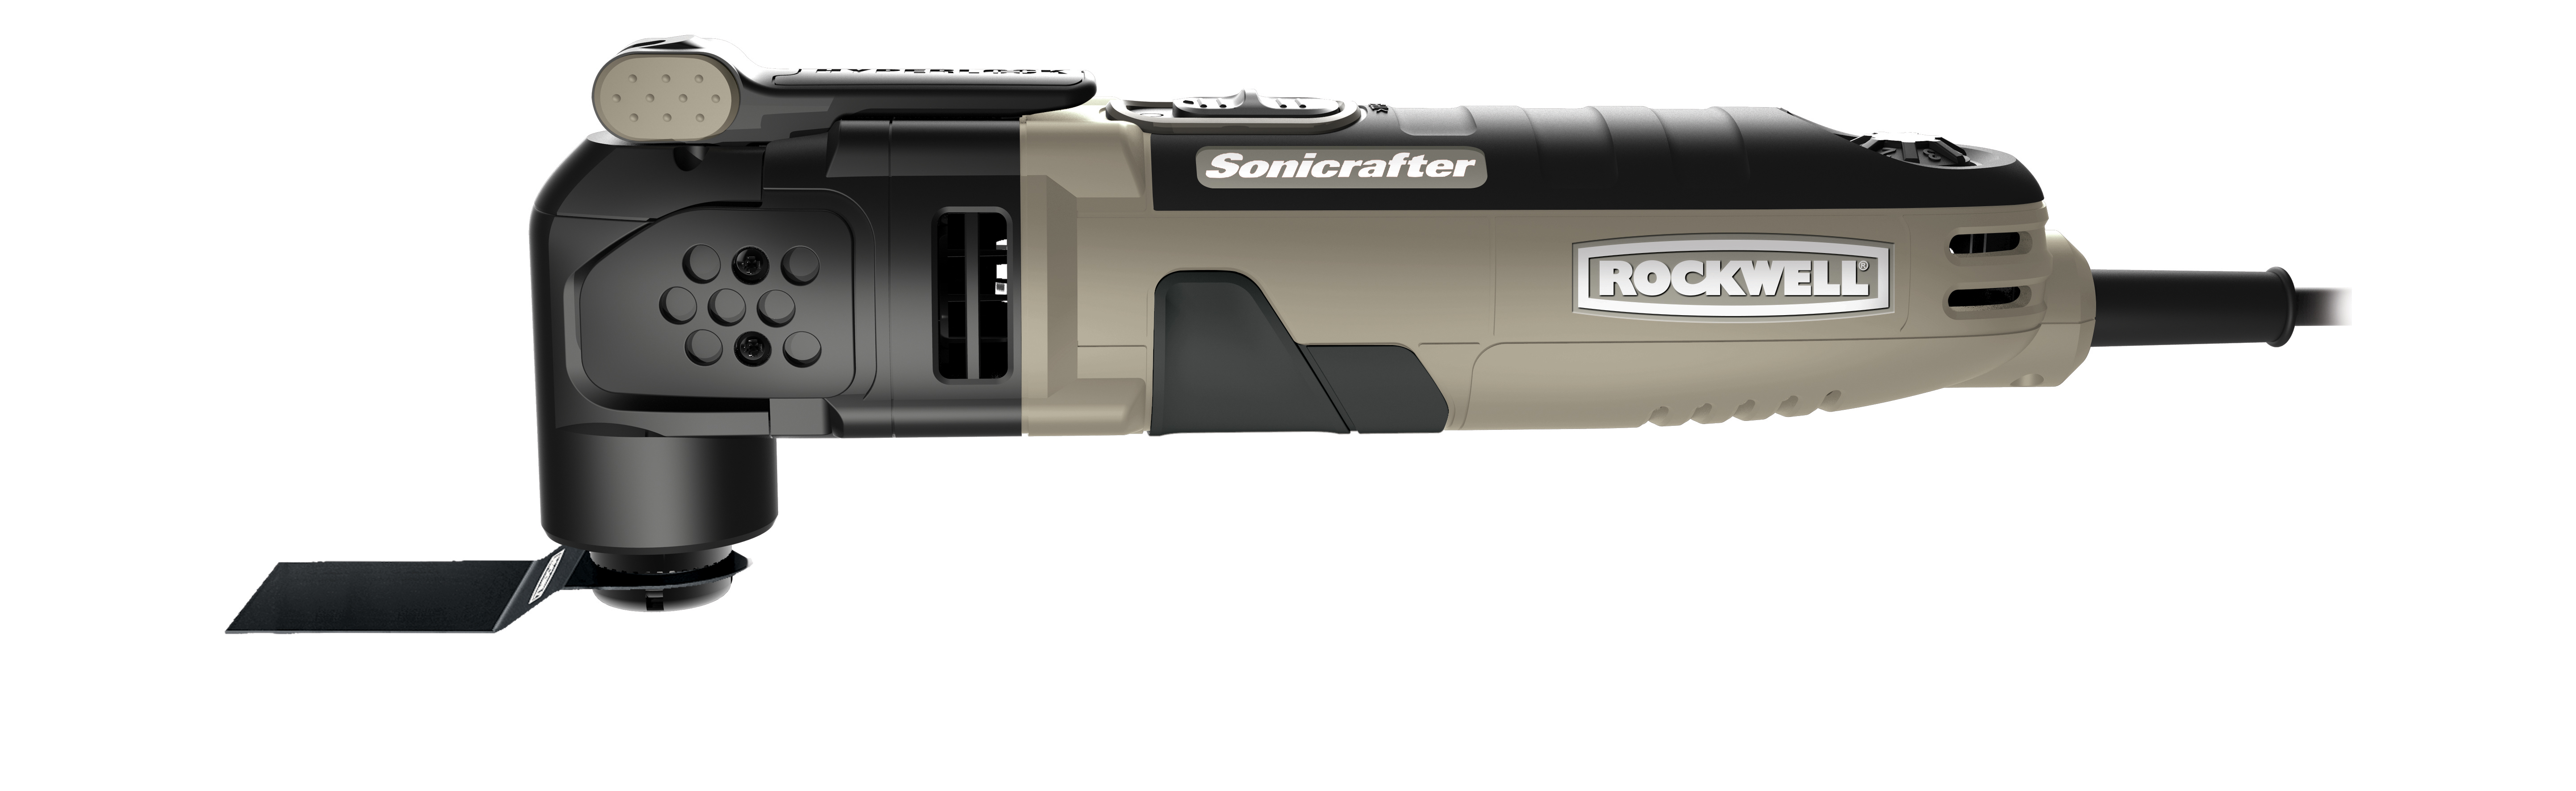 Rockwell’s New, Affordable Oscillating Tools and Accessories Make Ideal